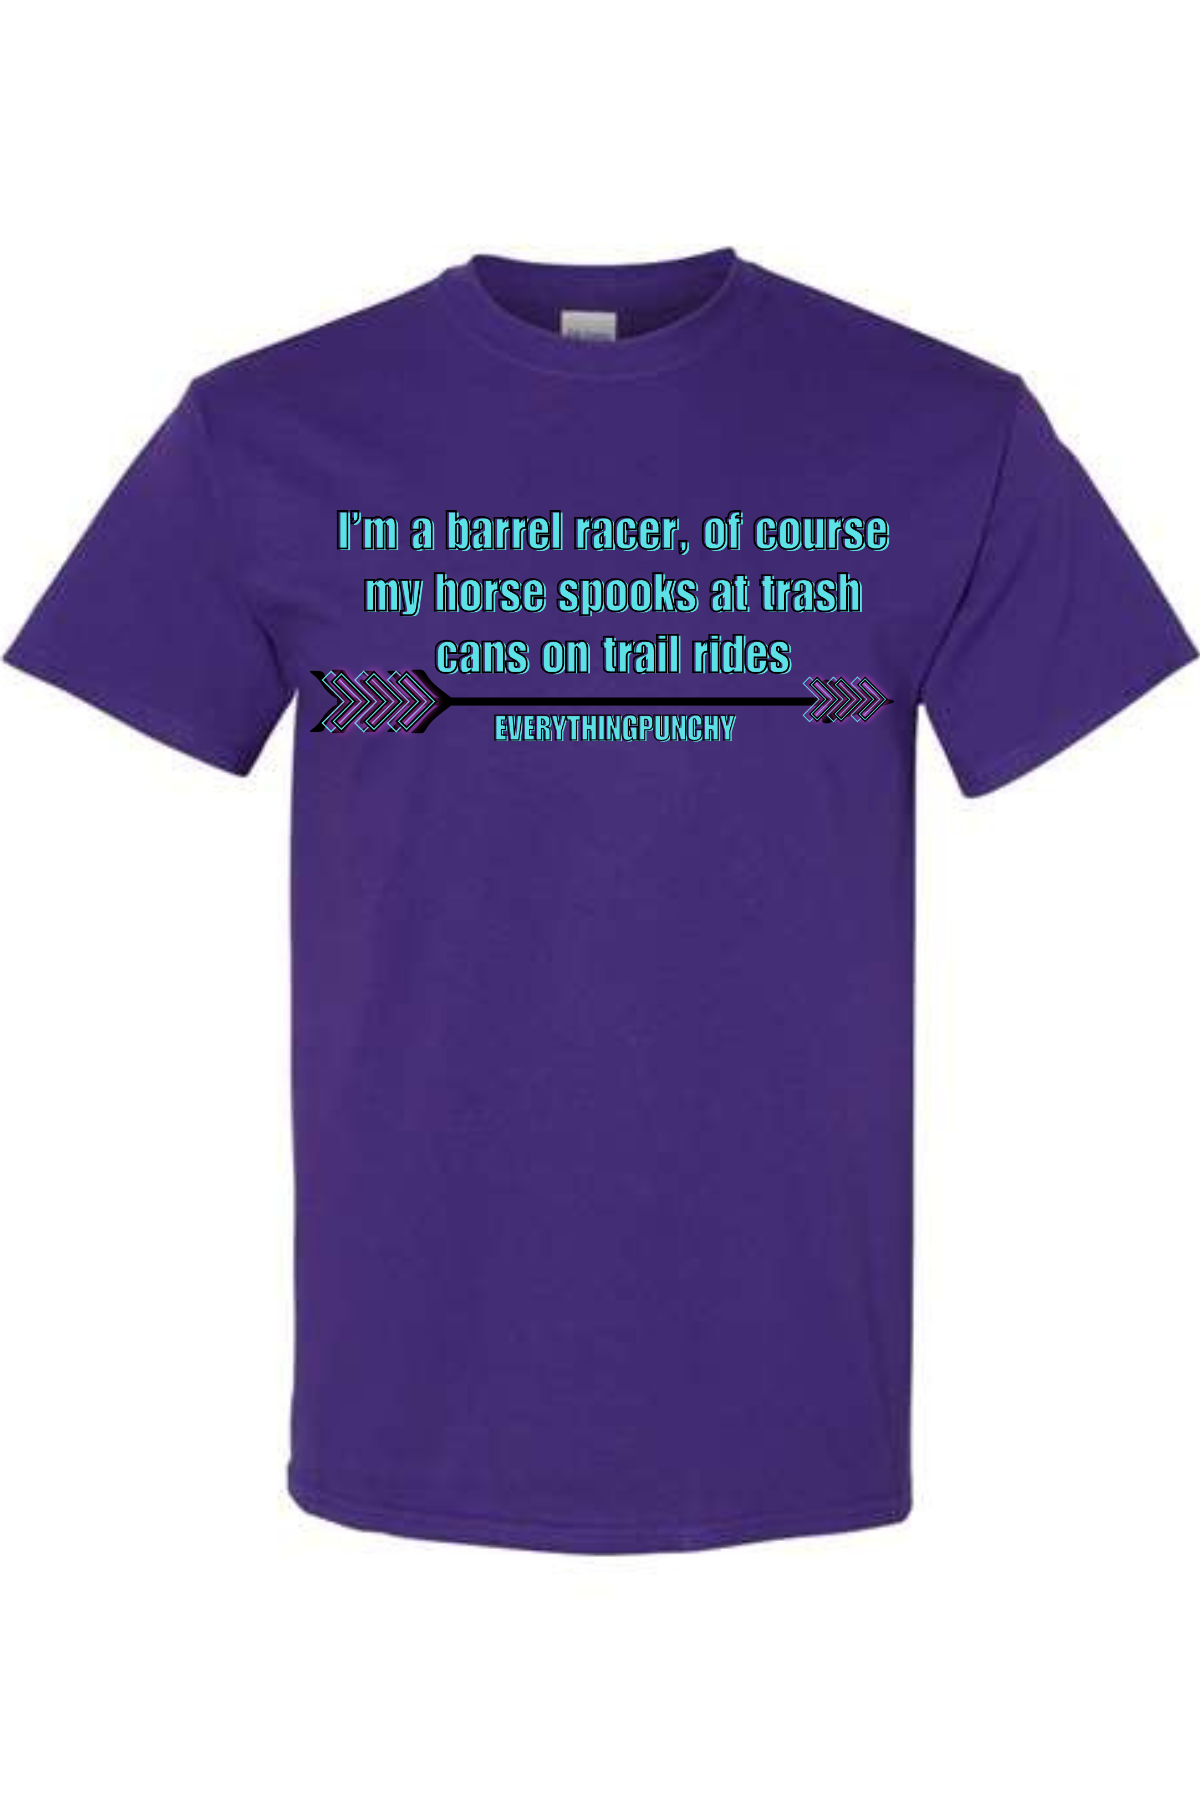 I'm a barrel racer, of course my horse spooks at trash cans on trail rides t-shirt